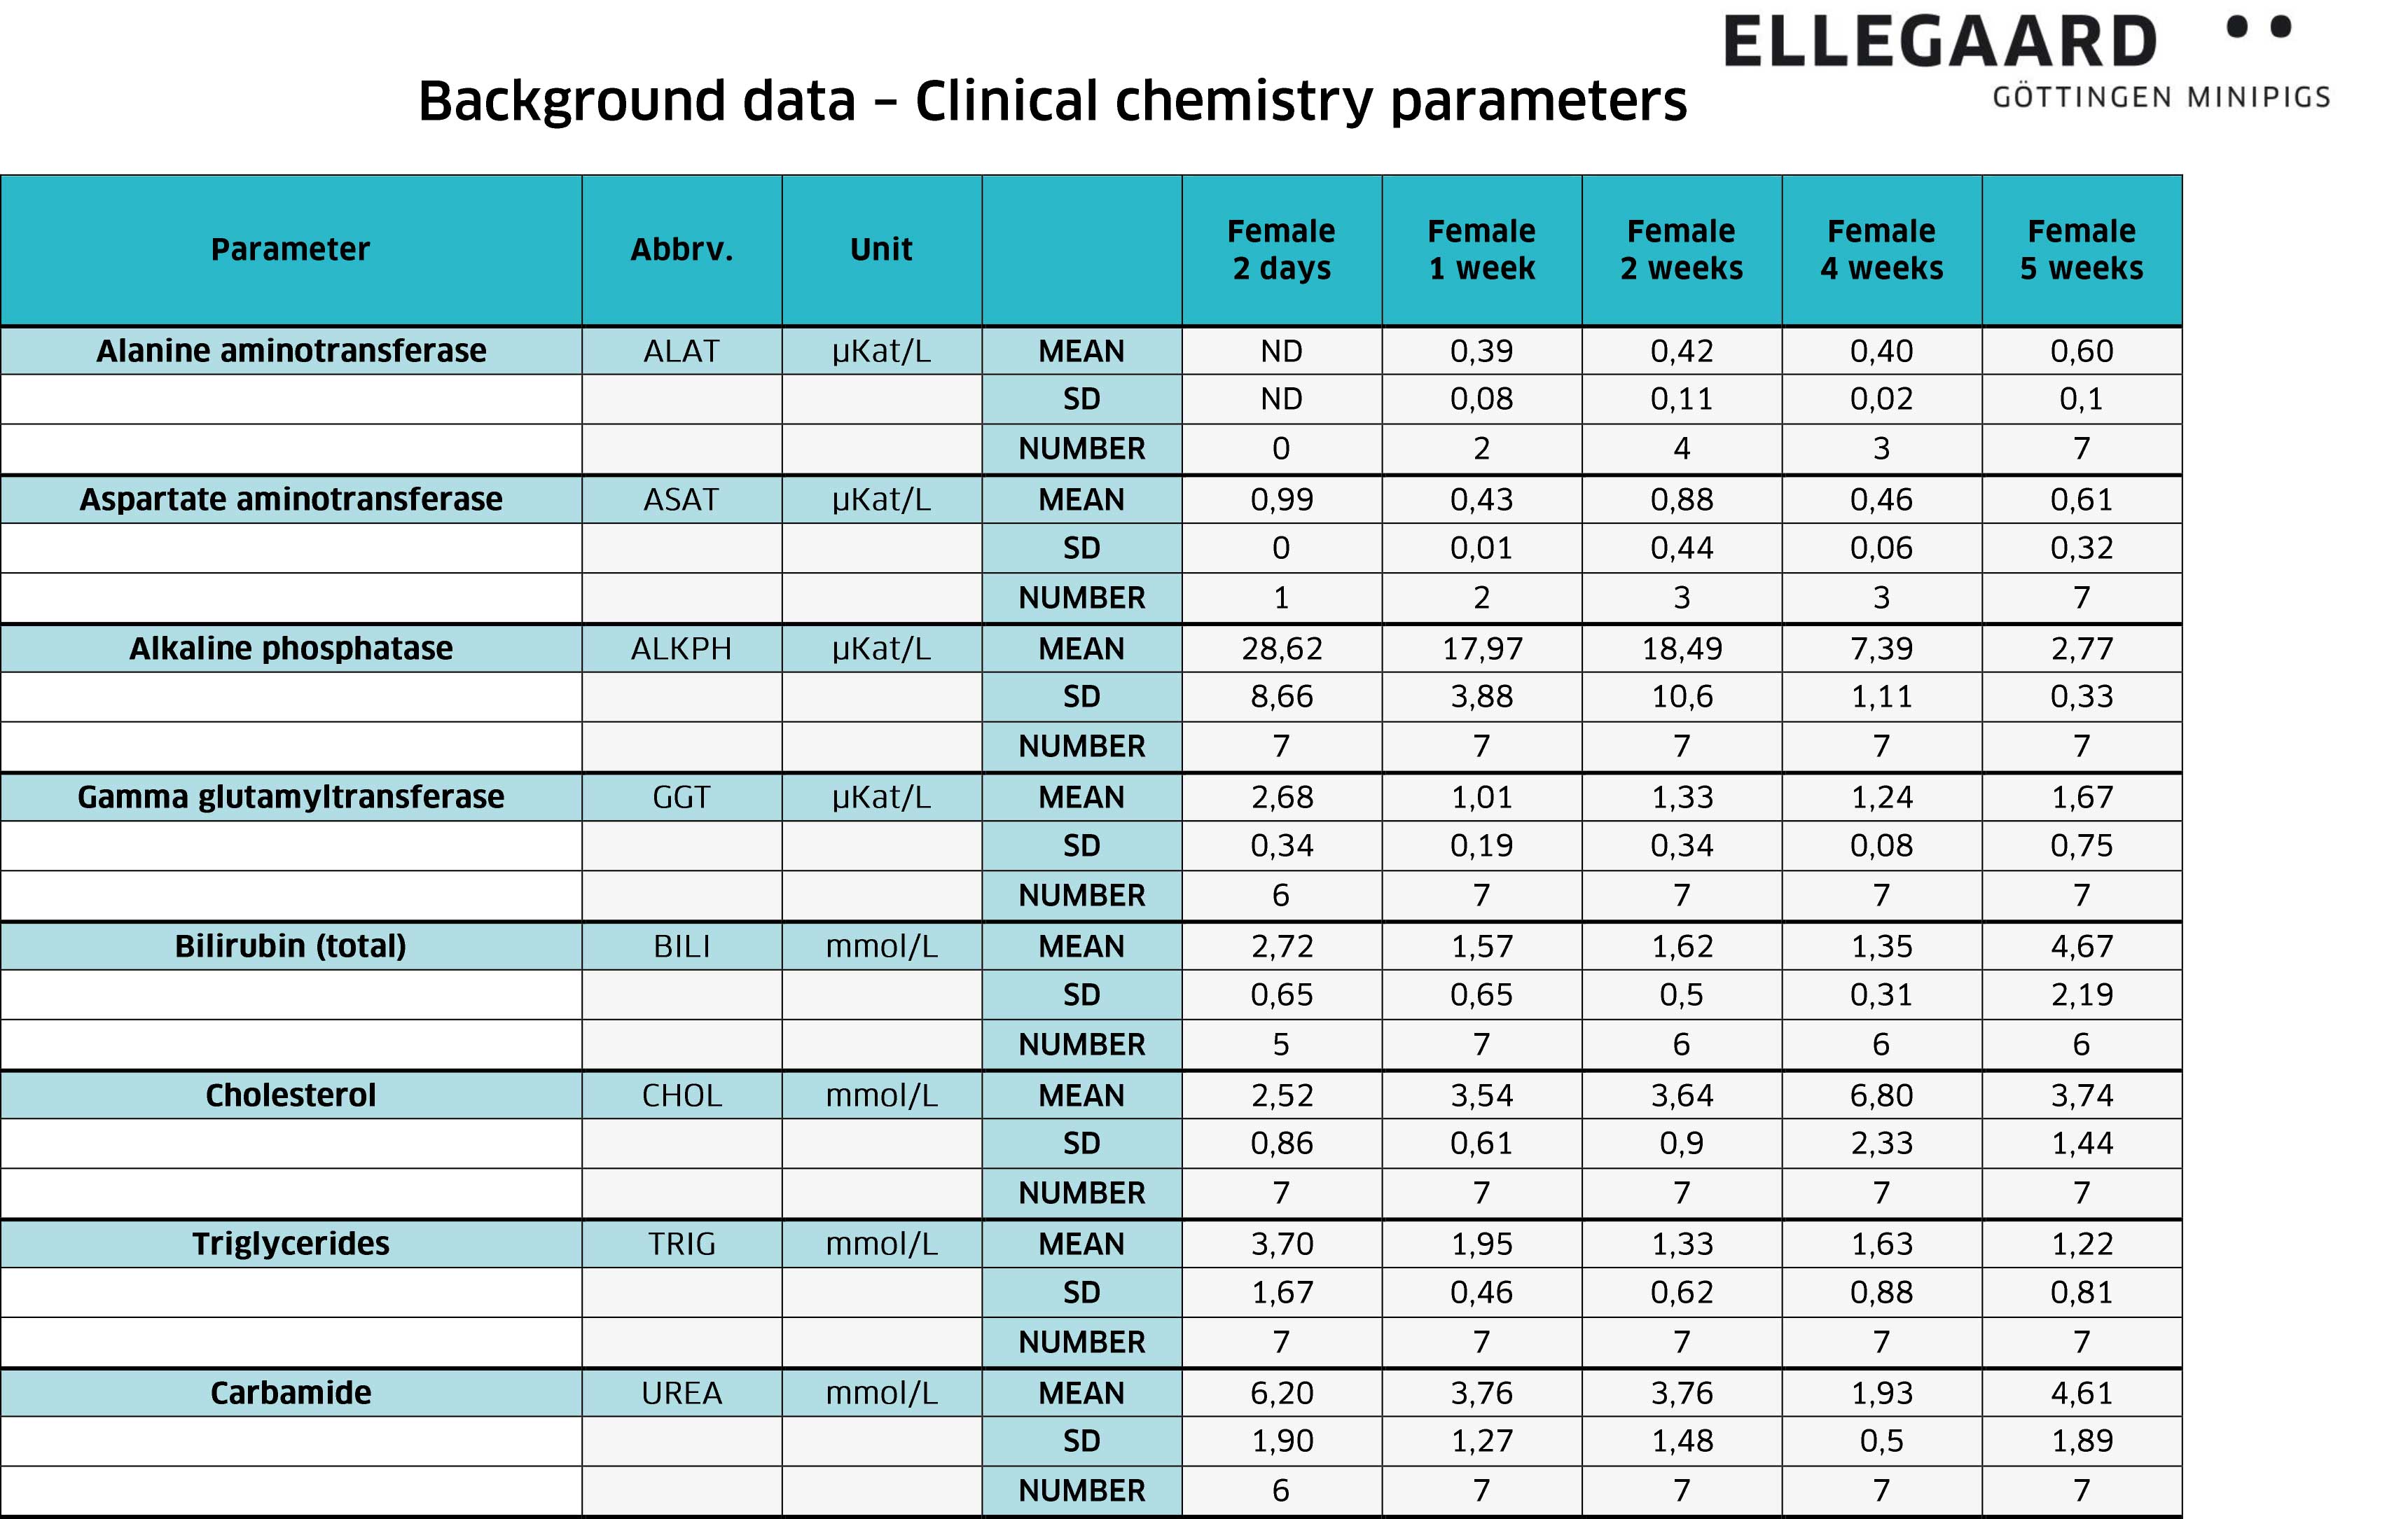 Clinical chemistry parameters for females